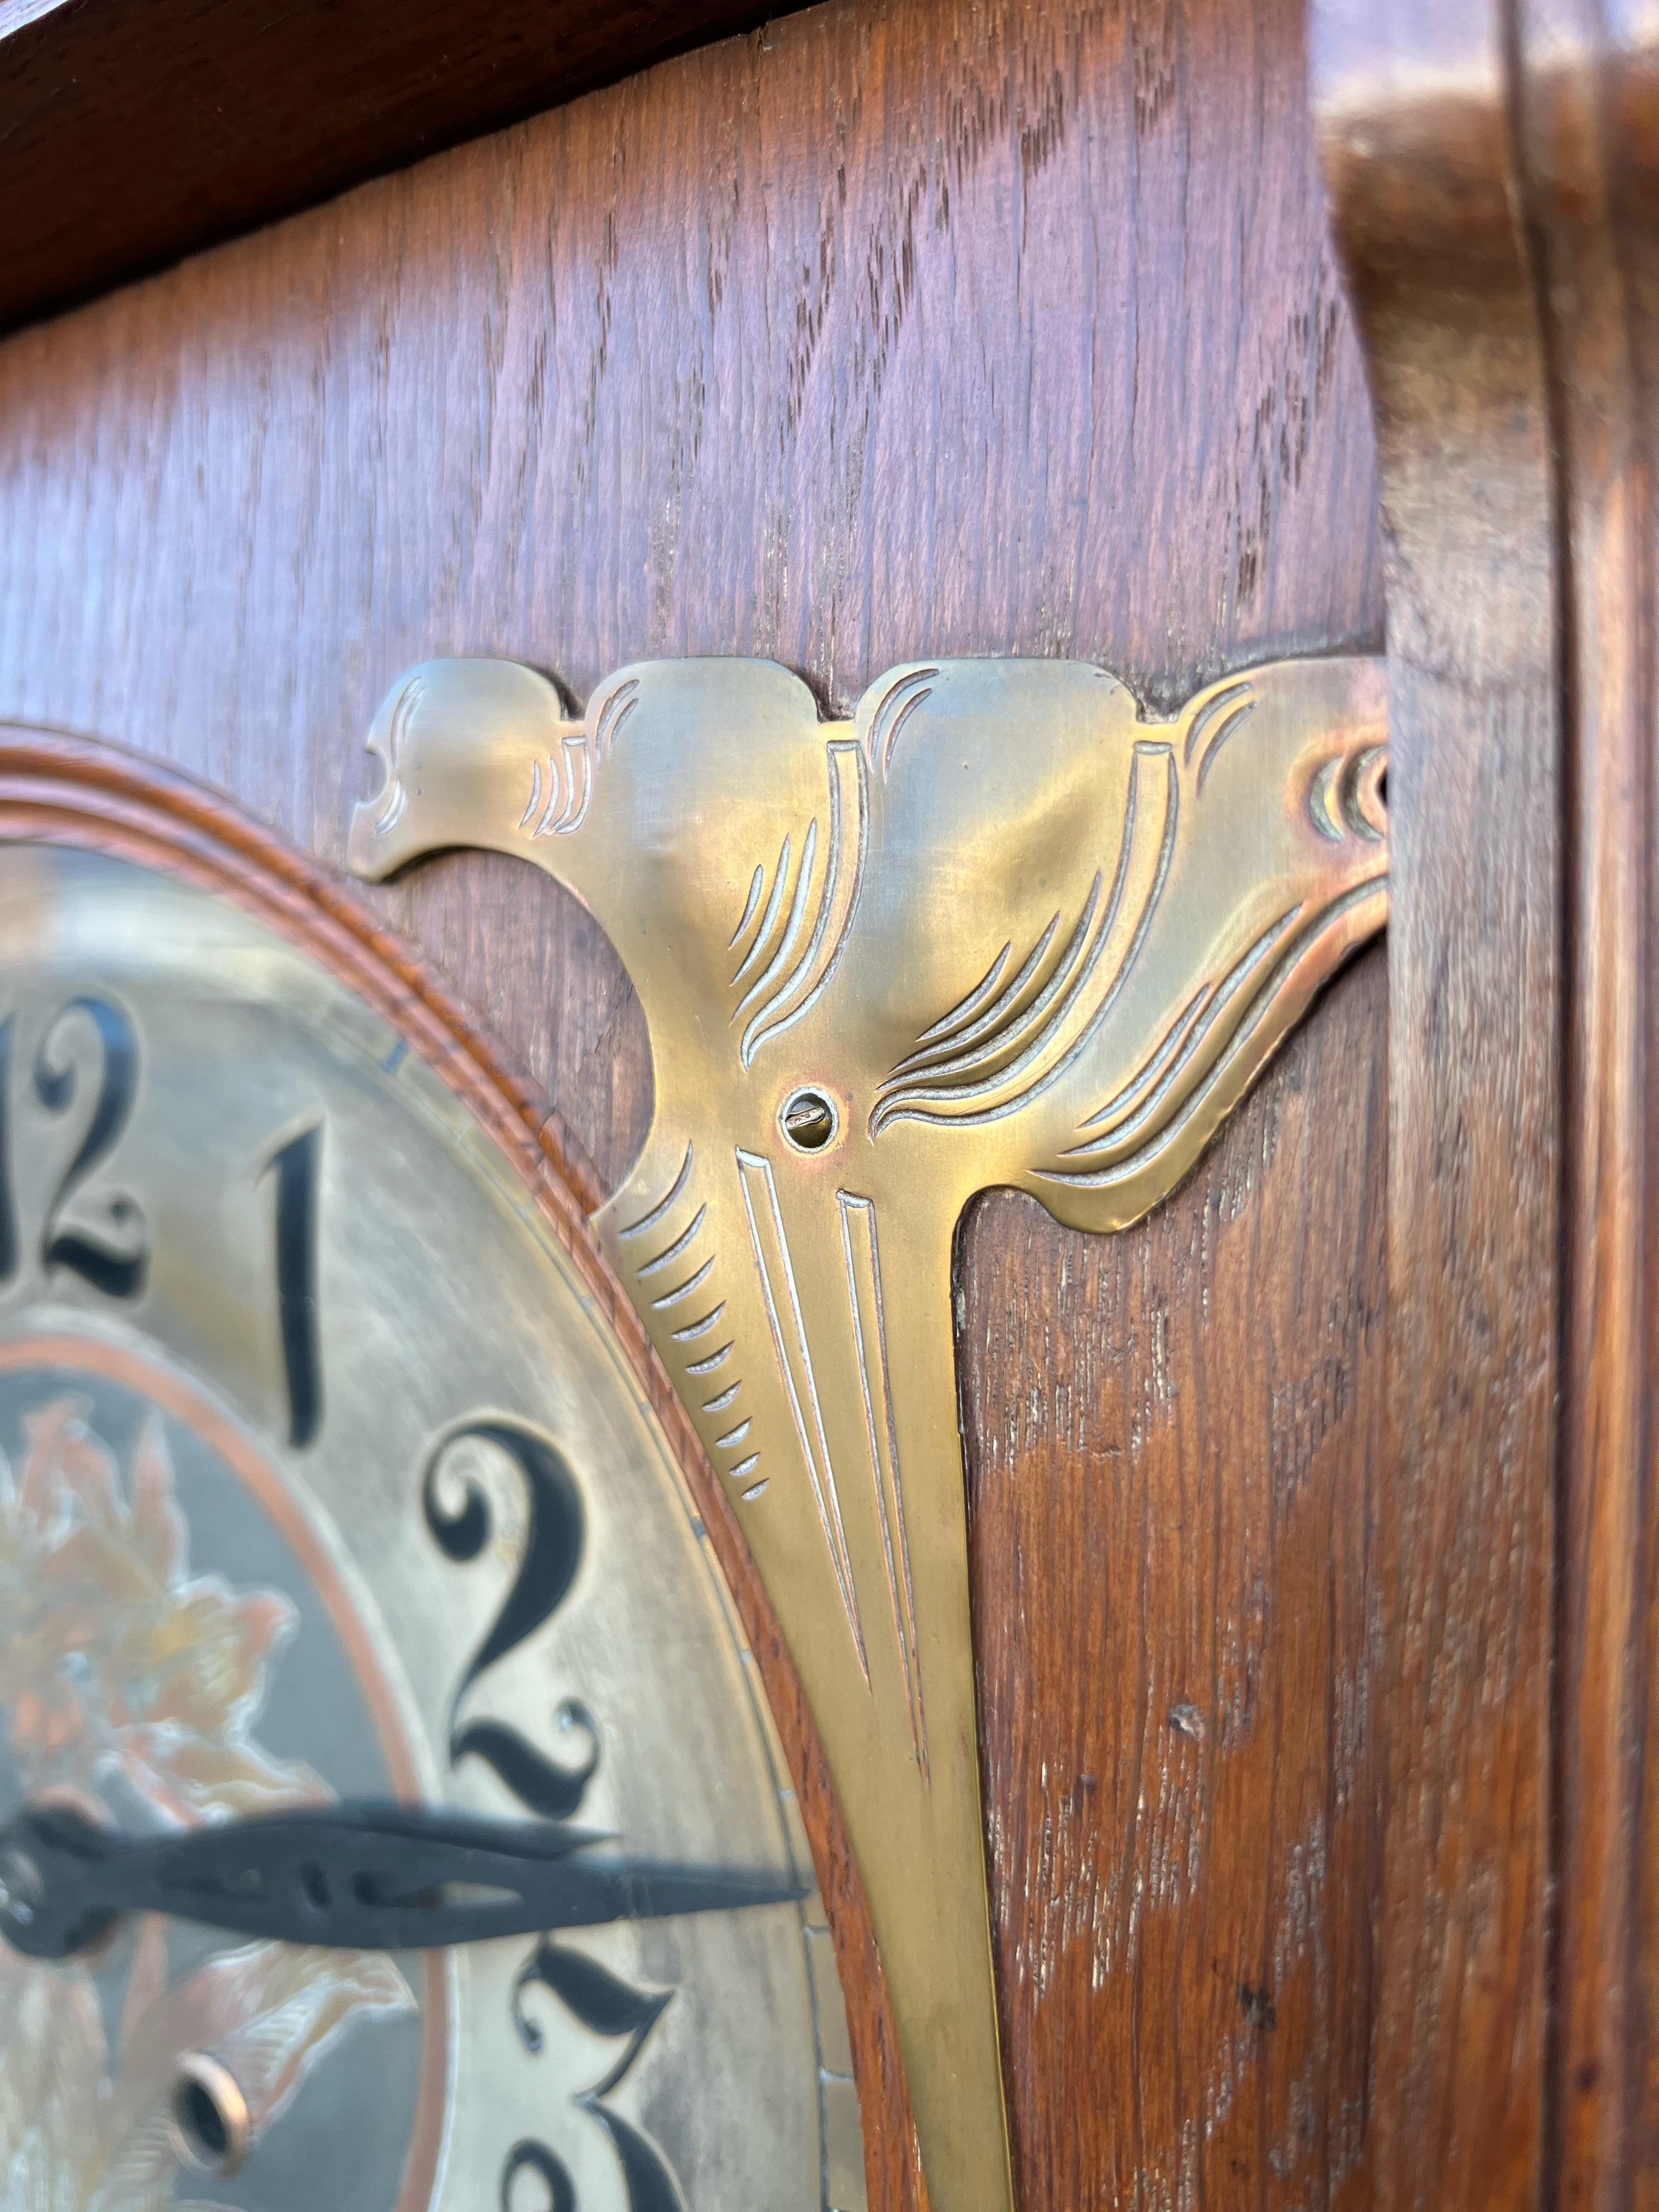 Large Arts & Crafts Brass & Oak Gustave Serrurier-Bovy Style Wall Clock, ca 1900 For Sale 10